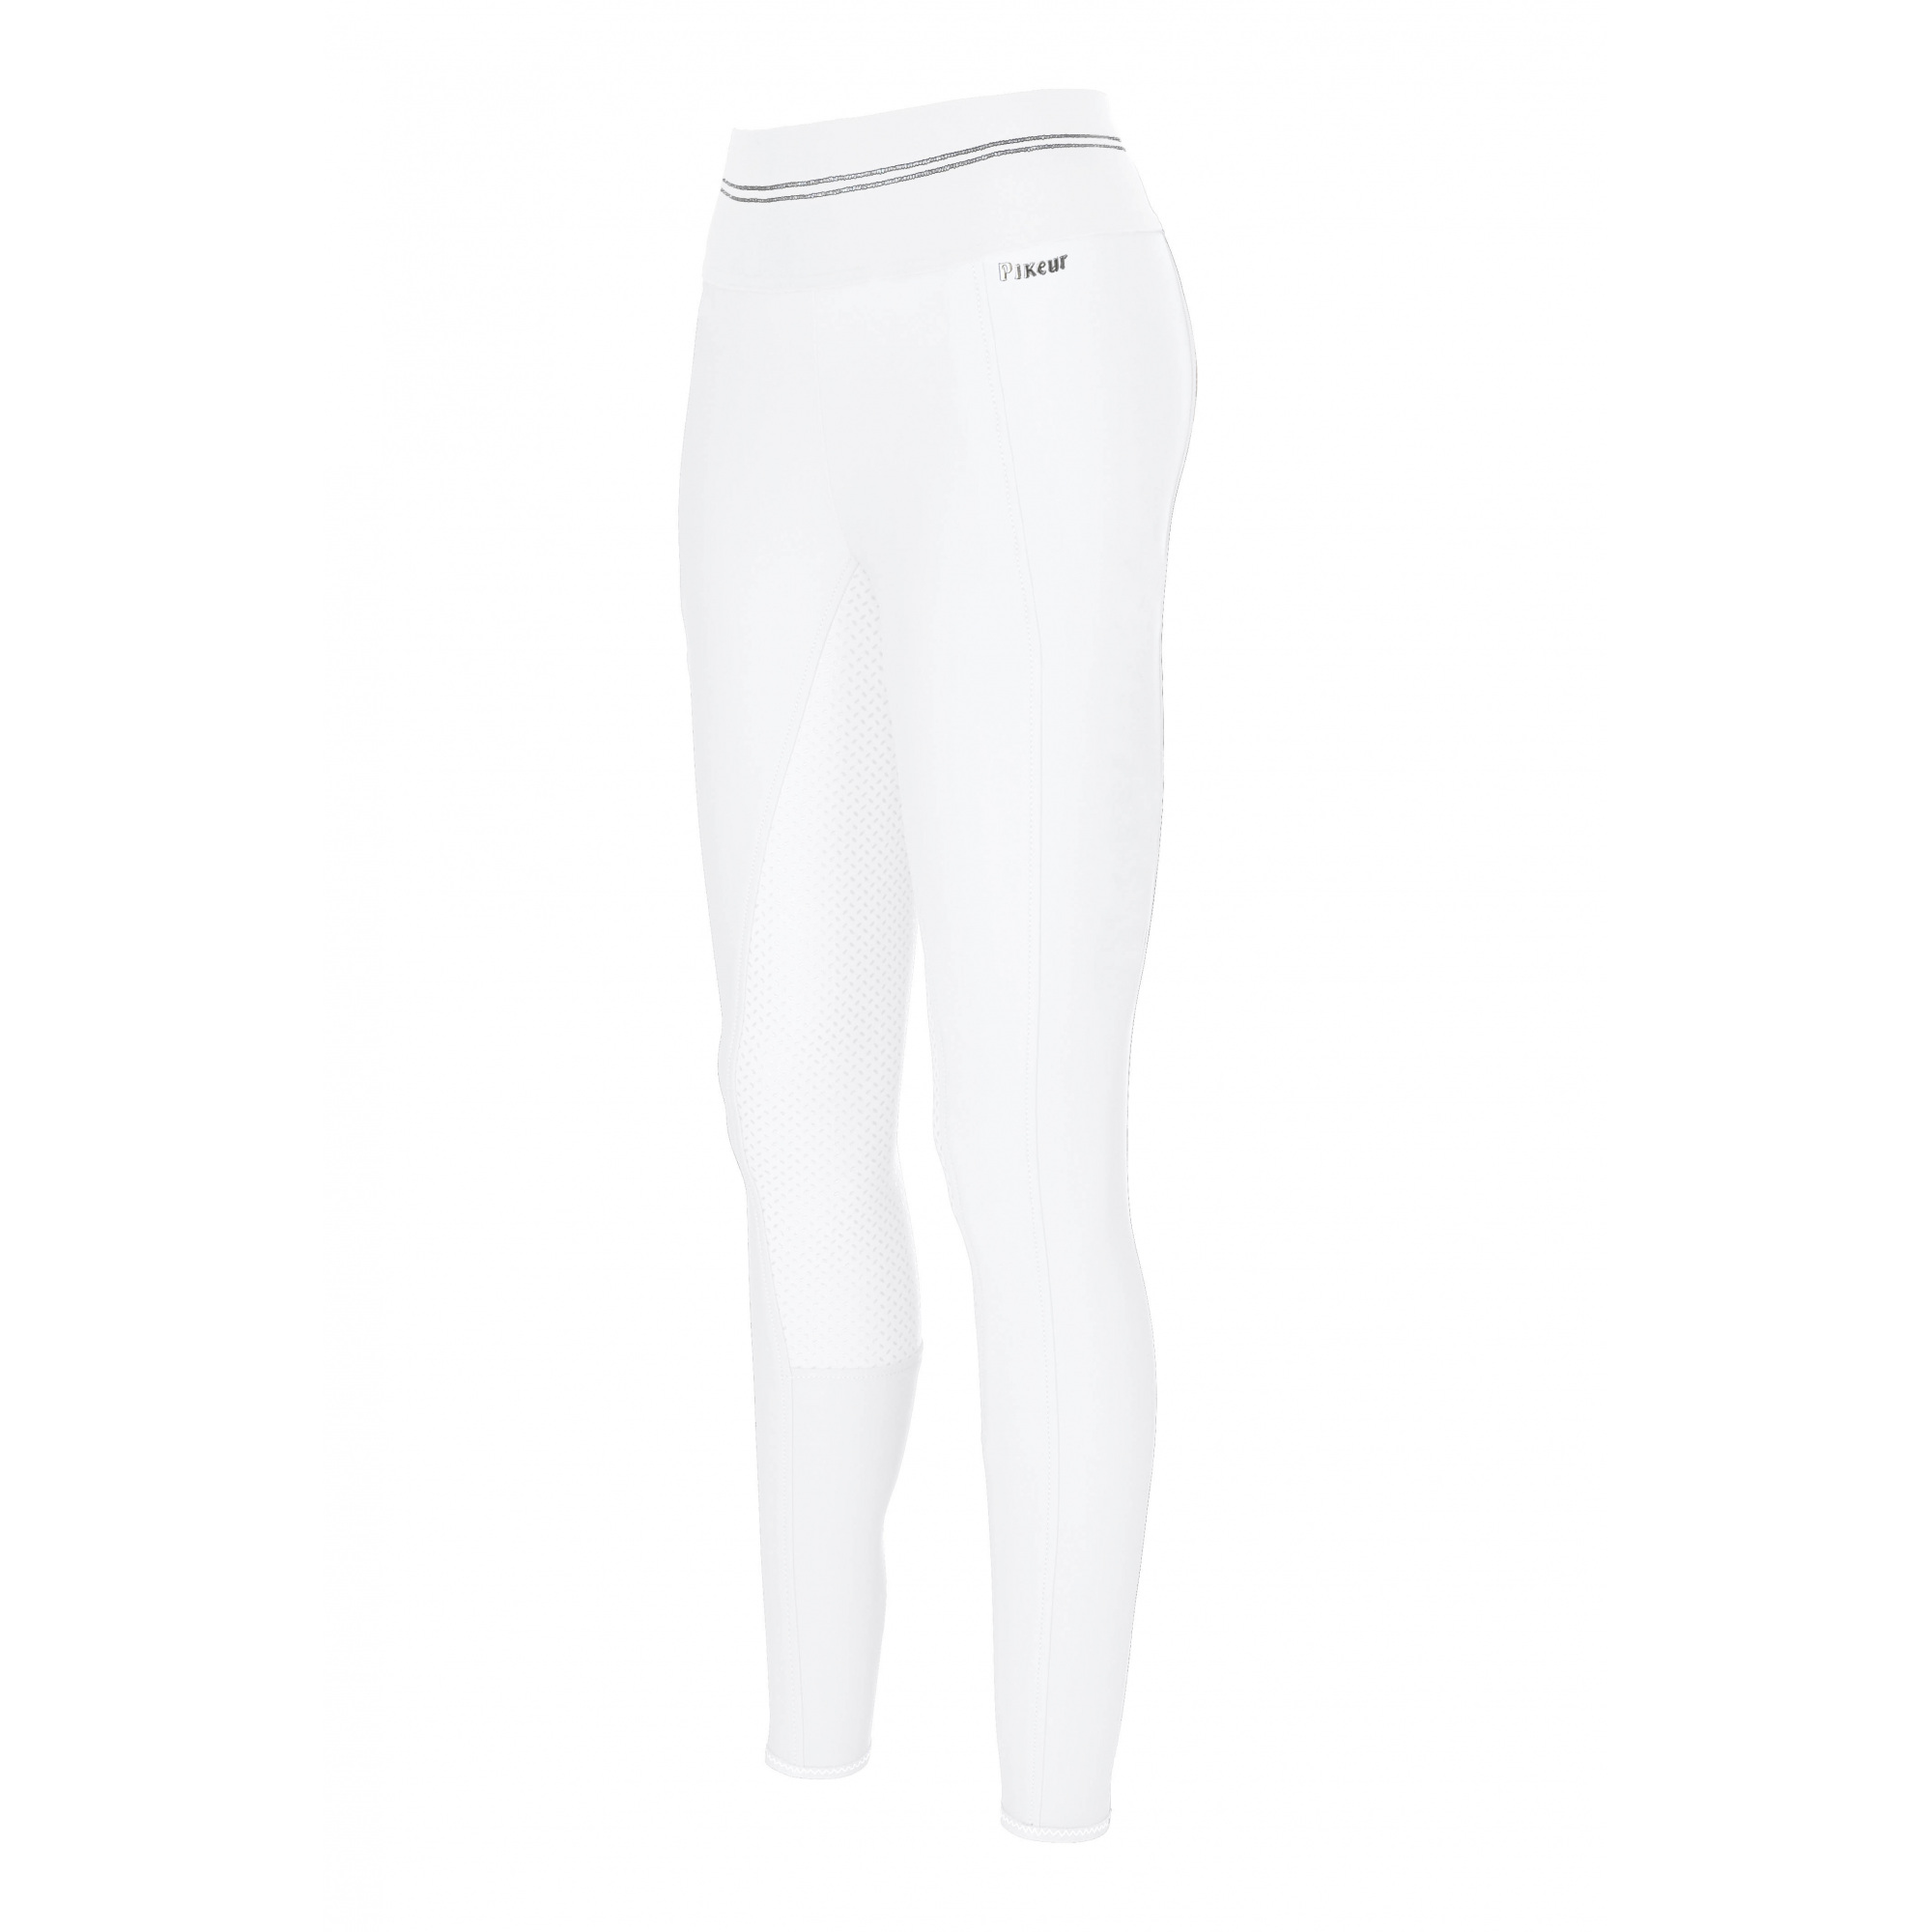 Off White color stretchable cotton ankle Leggings - LGA16-sonthuy.vn